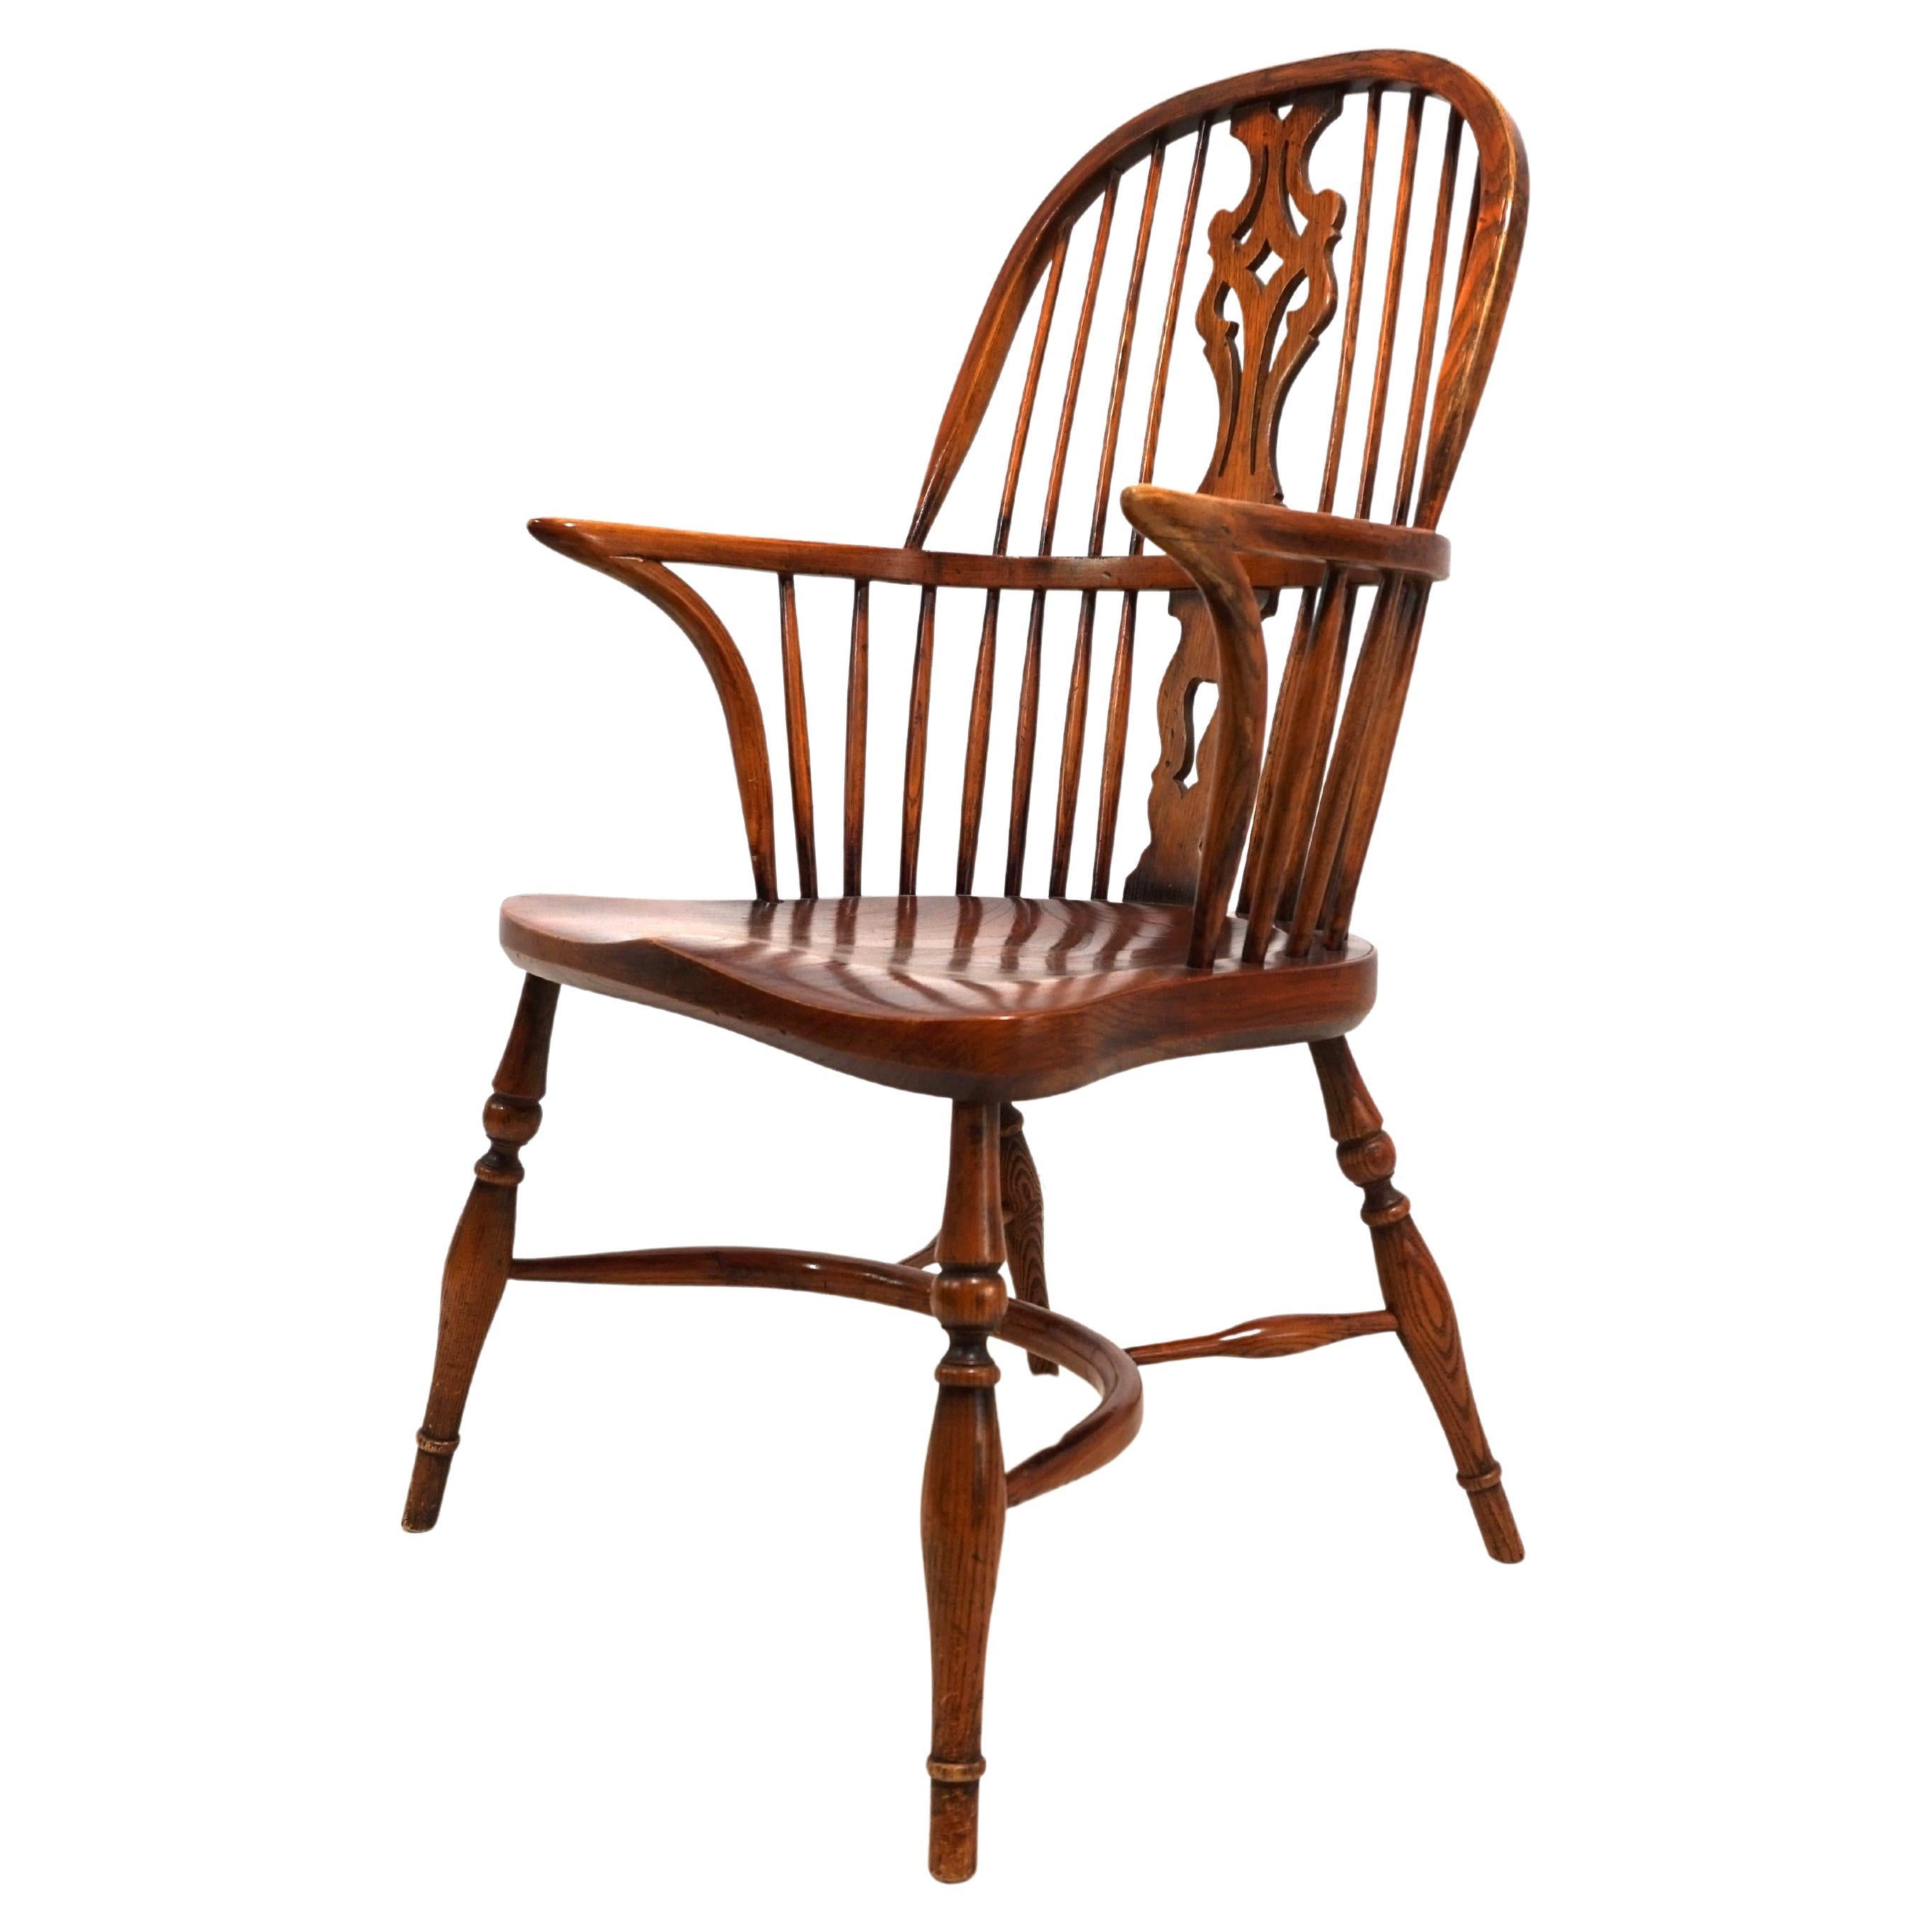 English Windsor chair with armrests For Sale